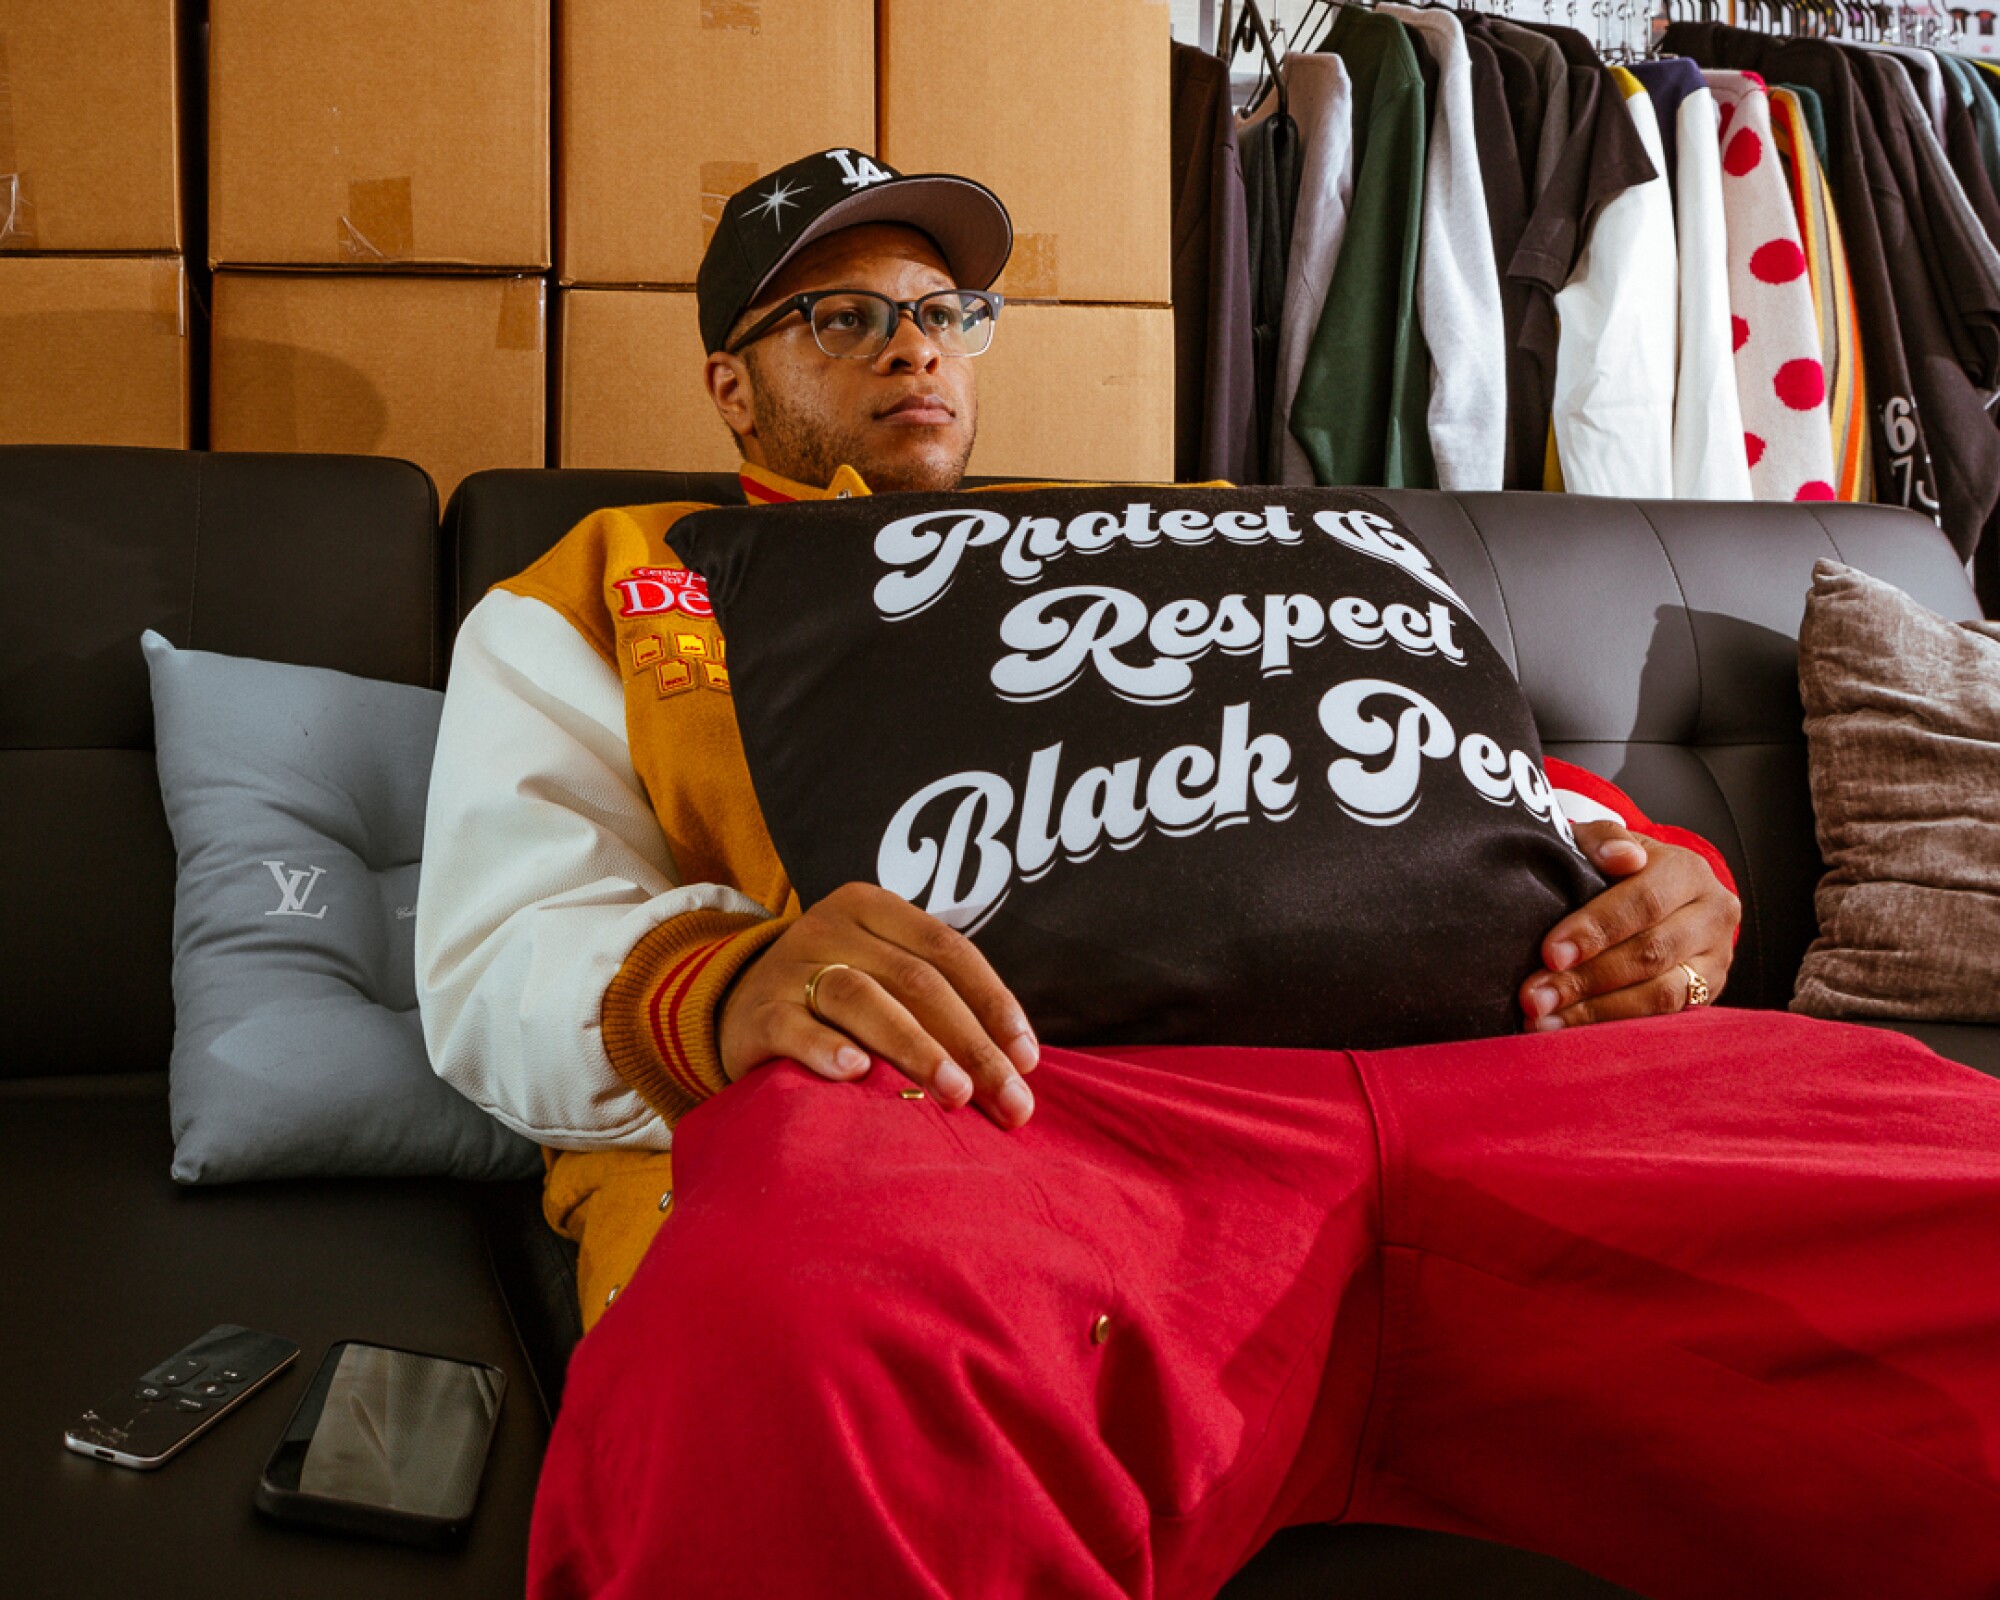 A person leans back on a couch, holding a pillow that says "Protect and respect Black people."